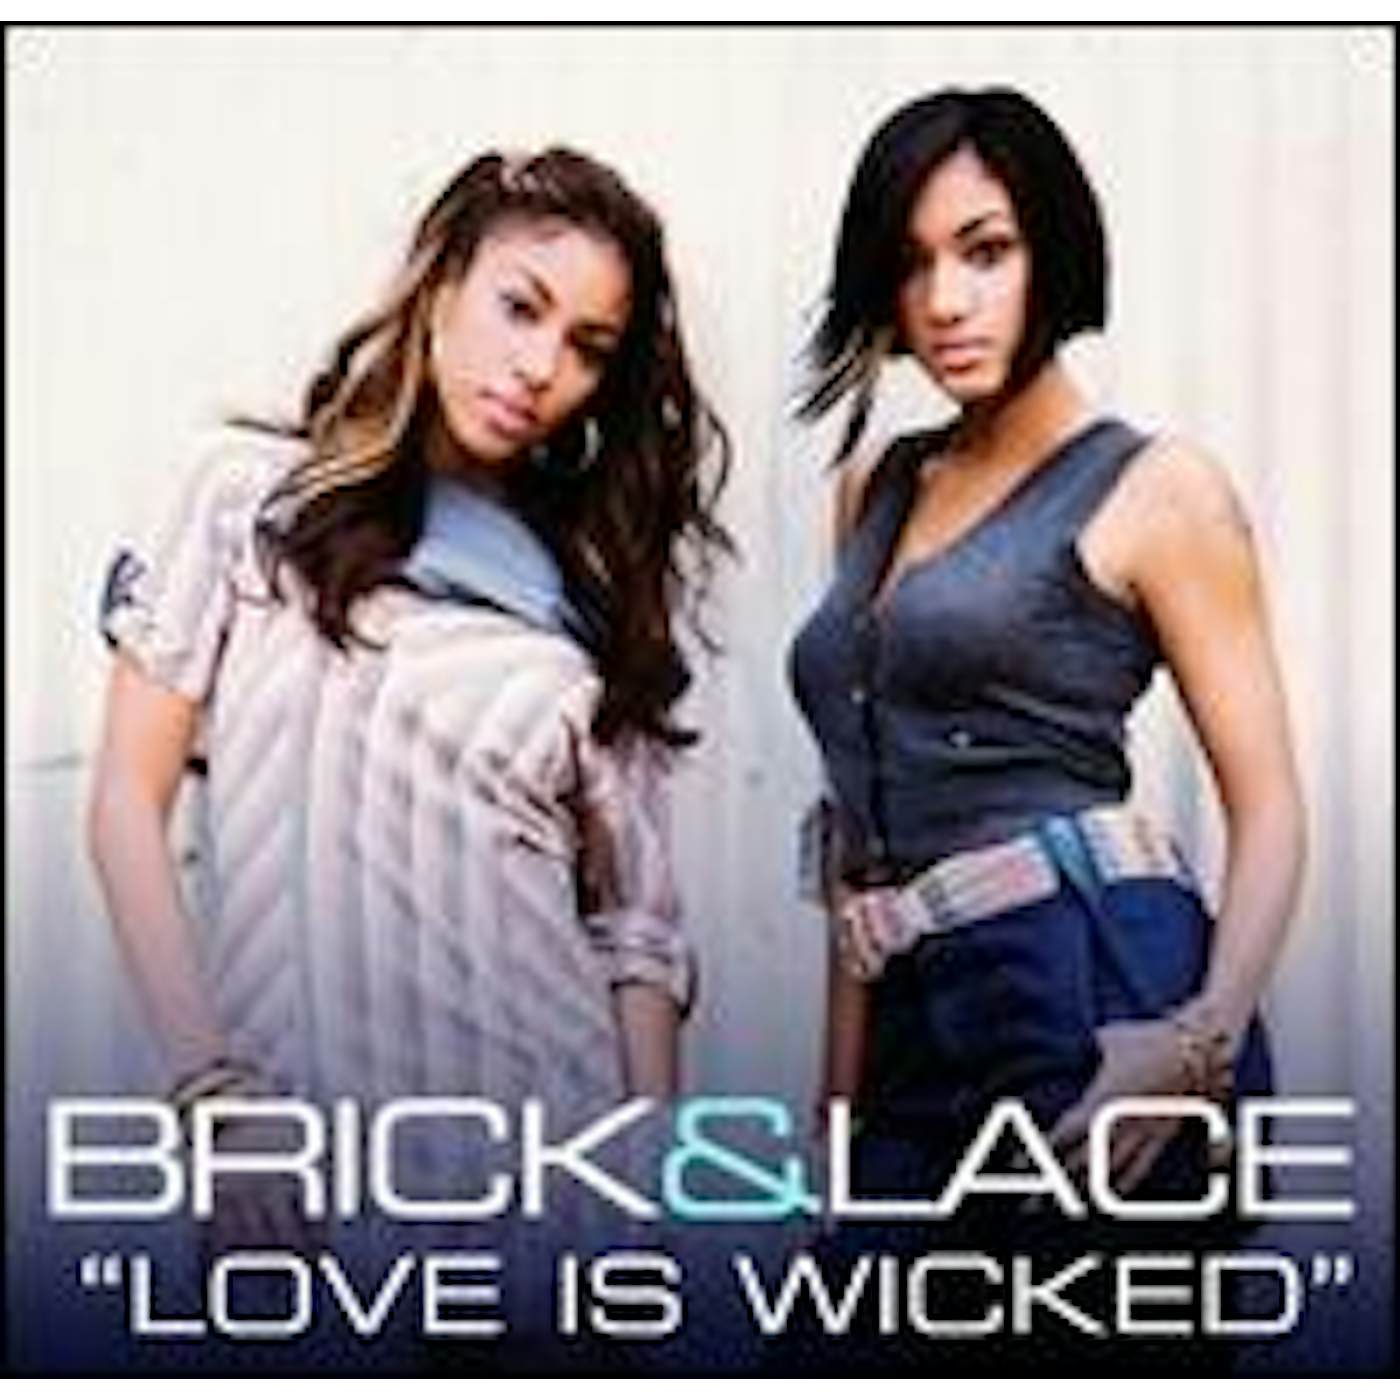 Brick & Lace LOVE IS WICKED (X3) / GET THAT CLEAR (X2) Vinyl Record